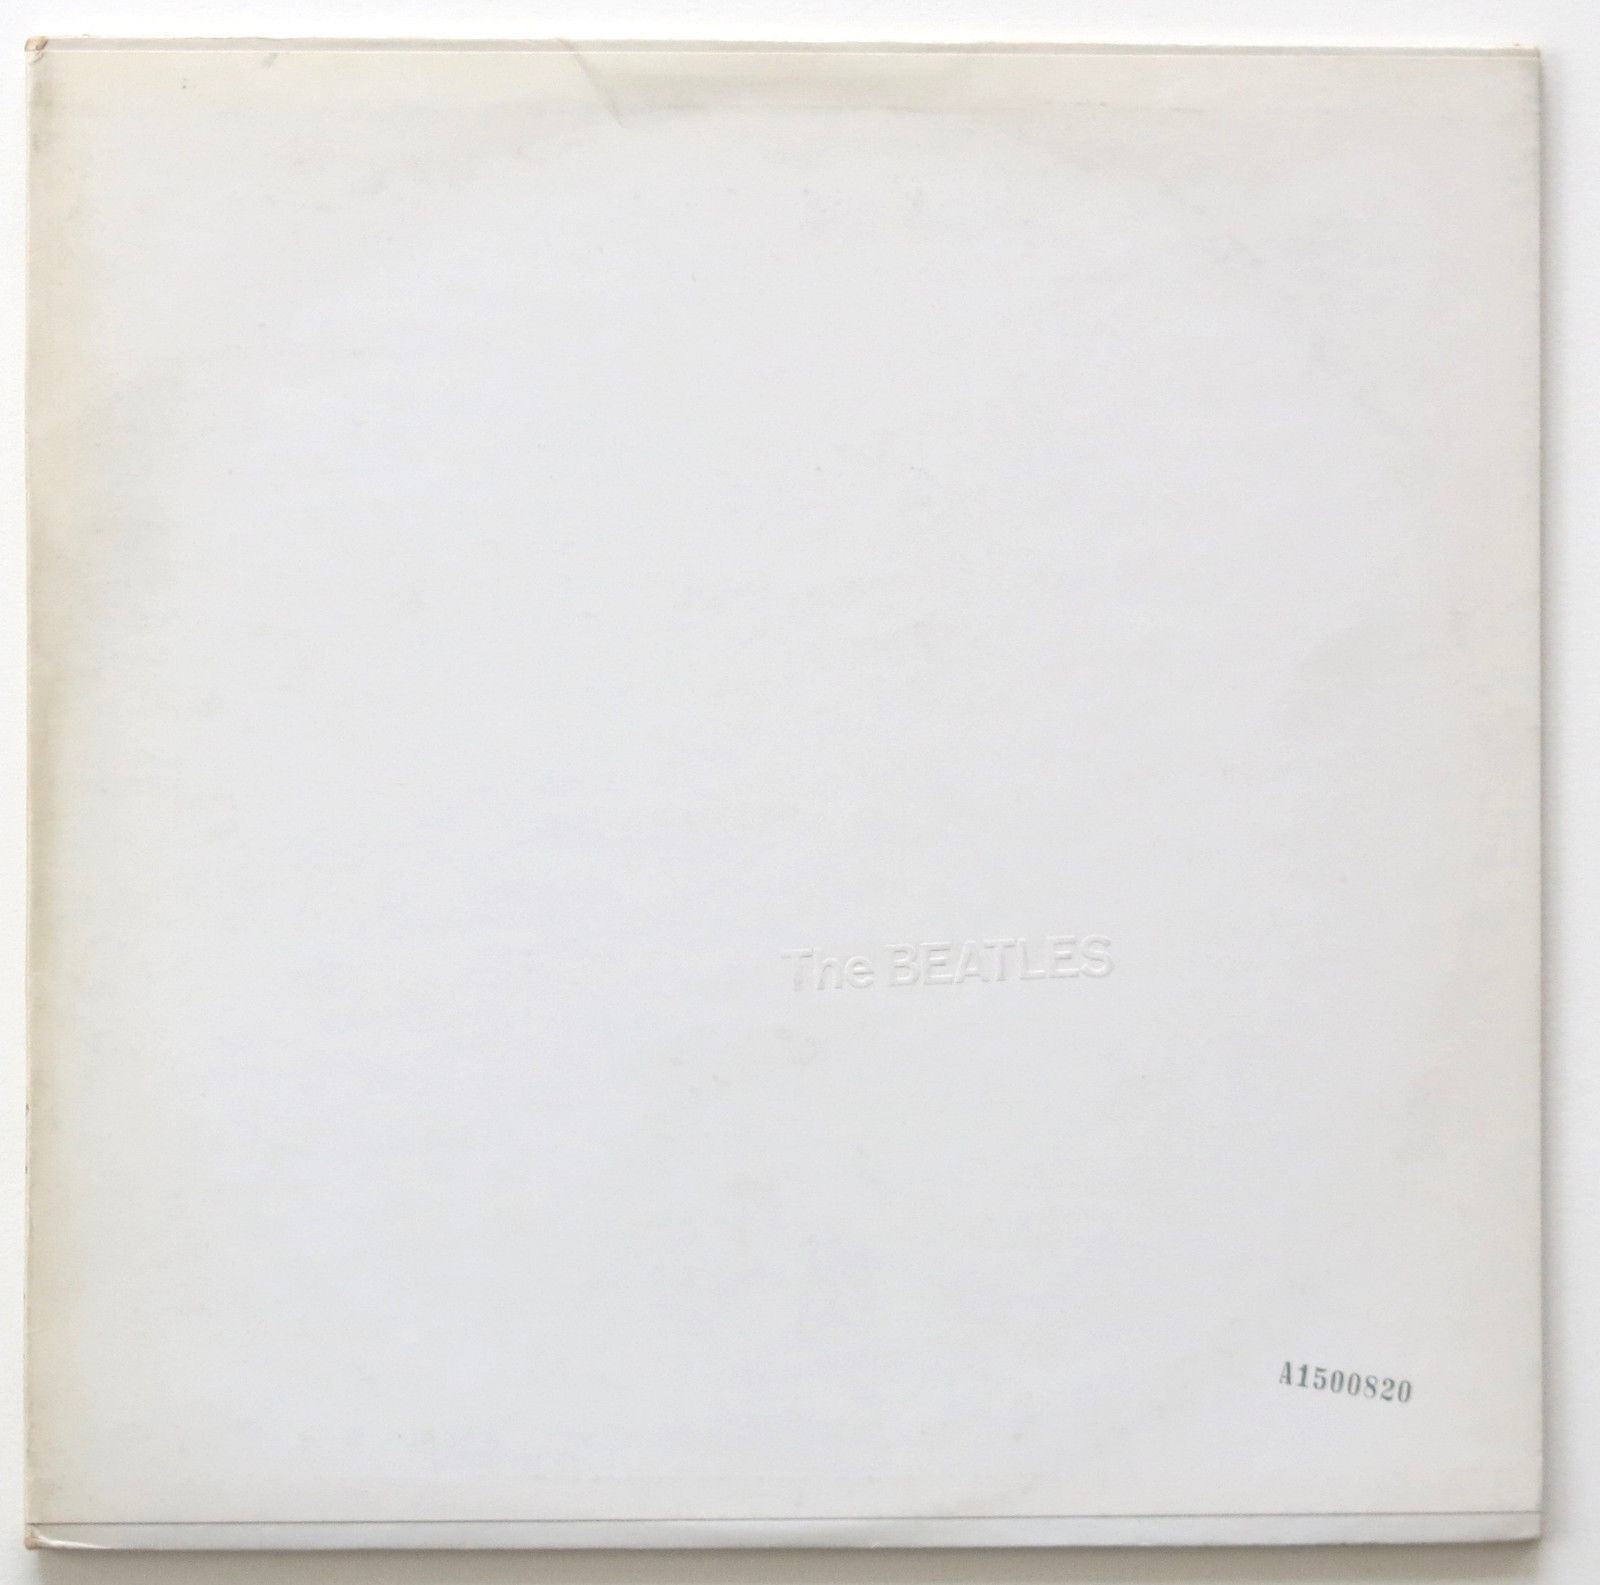 The Daily Beatle has moved!: Album covers: White album